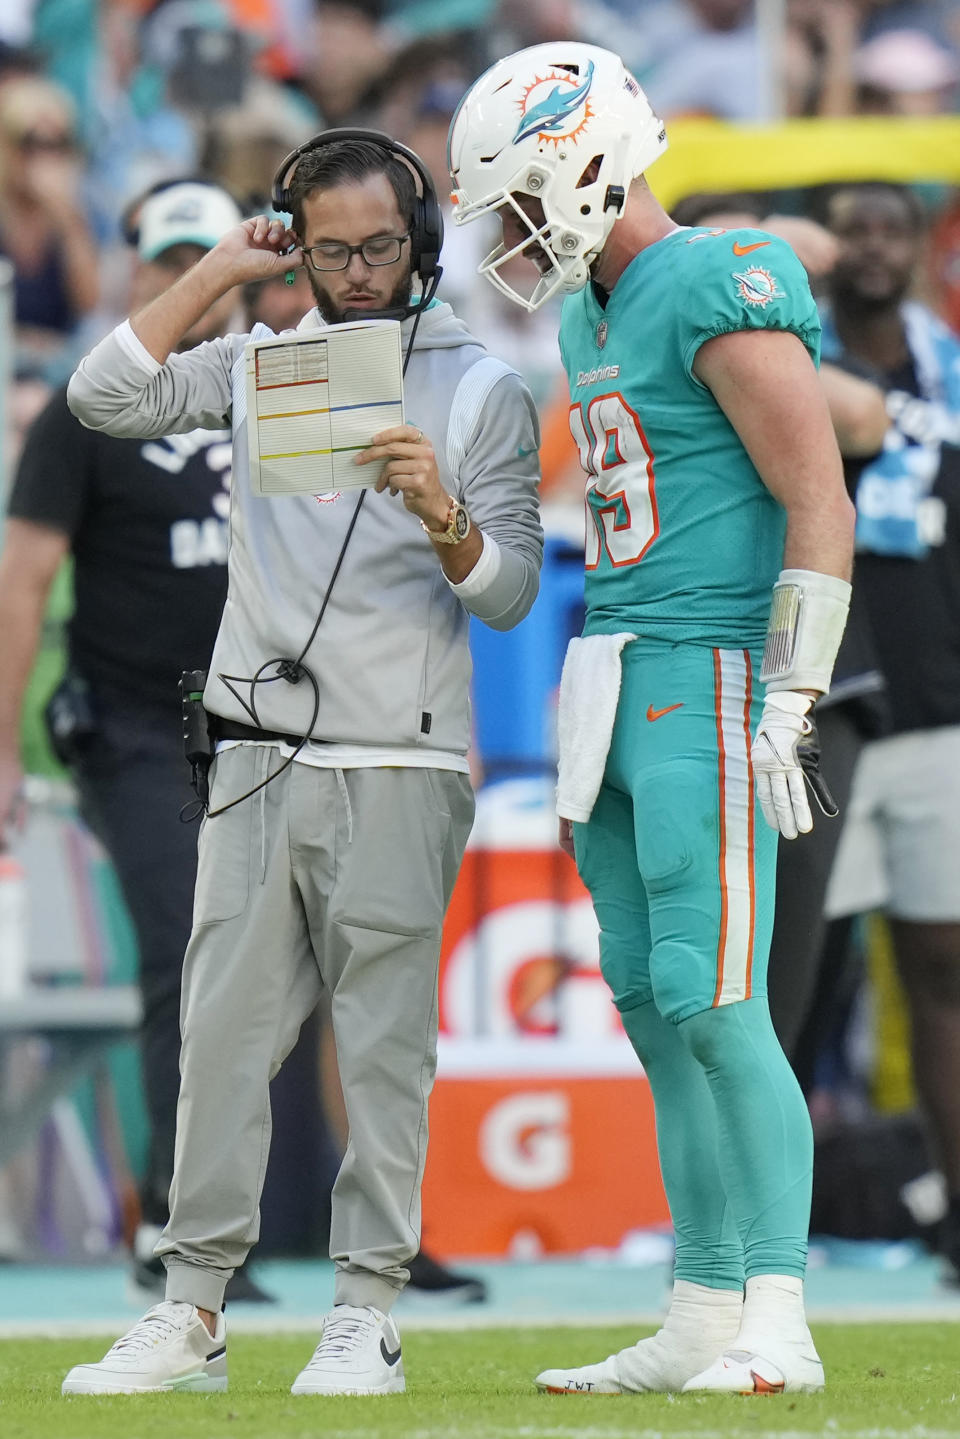 Miami Dolphins head coach Mike McDaniel talks to quarterback Skylar Thompson (19) during the second half of an NFL football game against the New York Jets, Sunday, Jan. 8, 2023, in Miami Gardens, Fla. (AP Photo/Lynne Sladky)